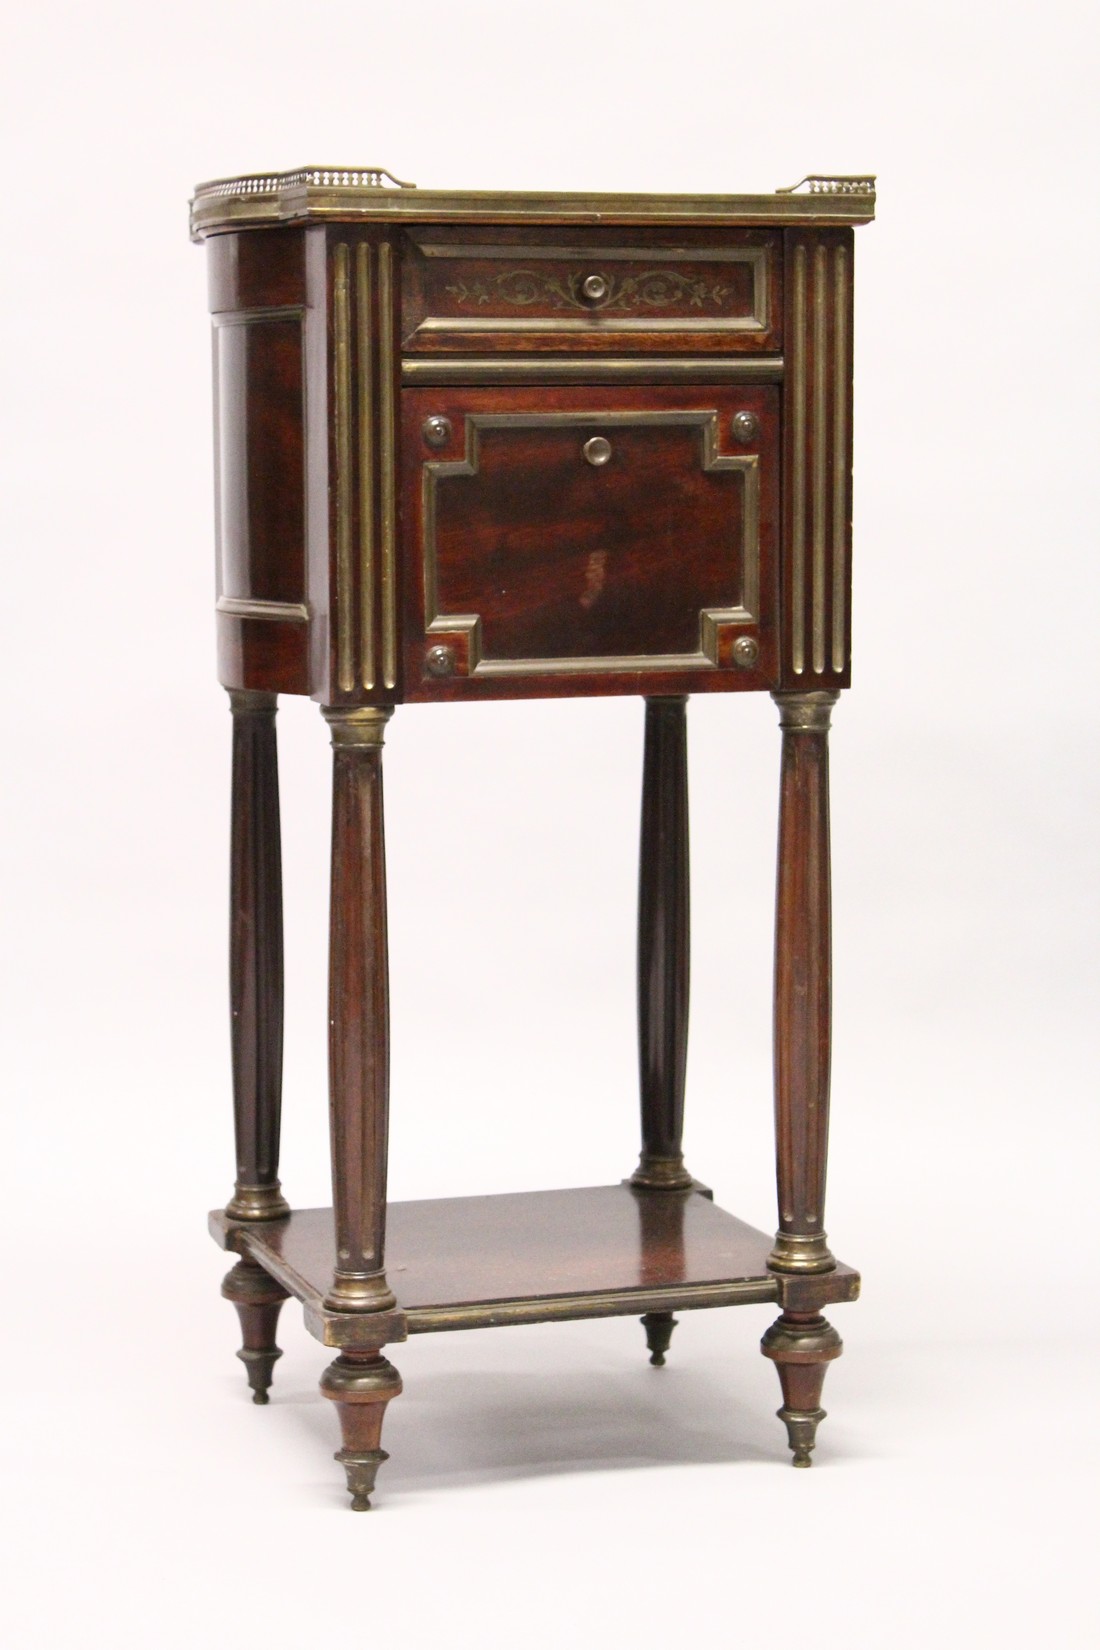 A 19TH CENTURY FRENCH MAHOGANY, MARBLE AND BRASS INLAID BEDSIDE COMMODE, with galleried rouge marble - Image 2 of 4